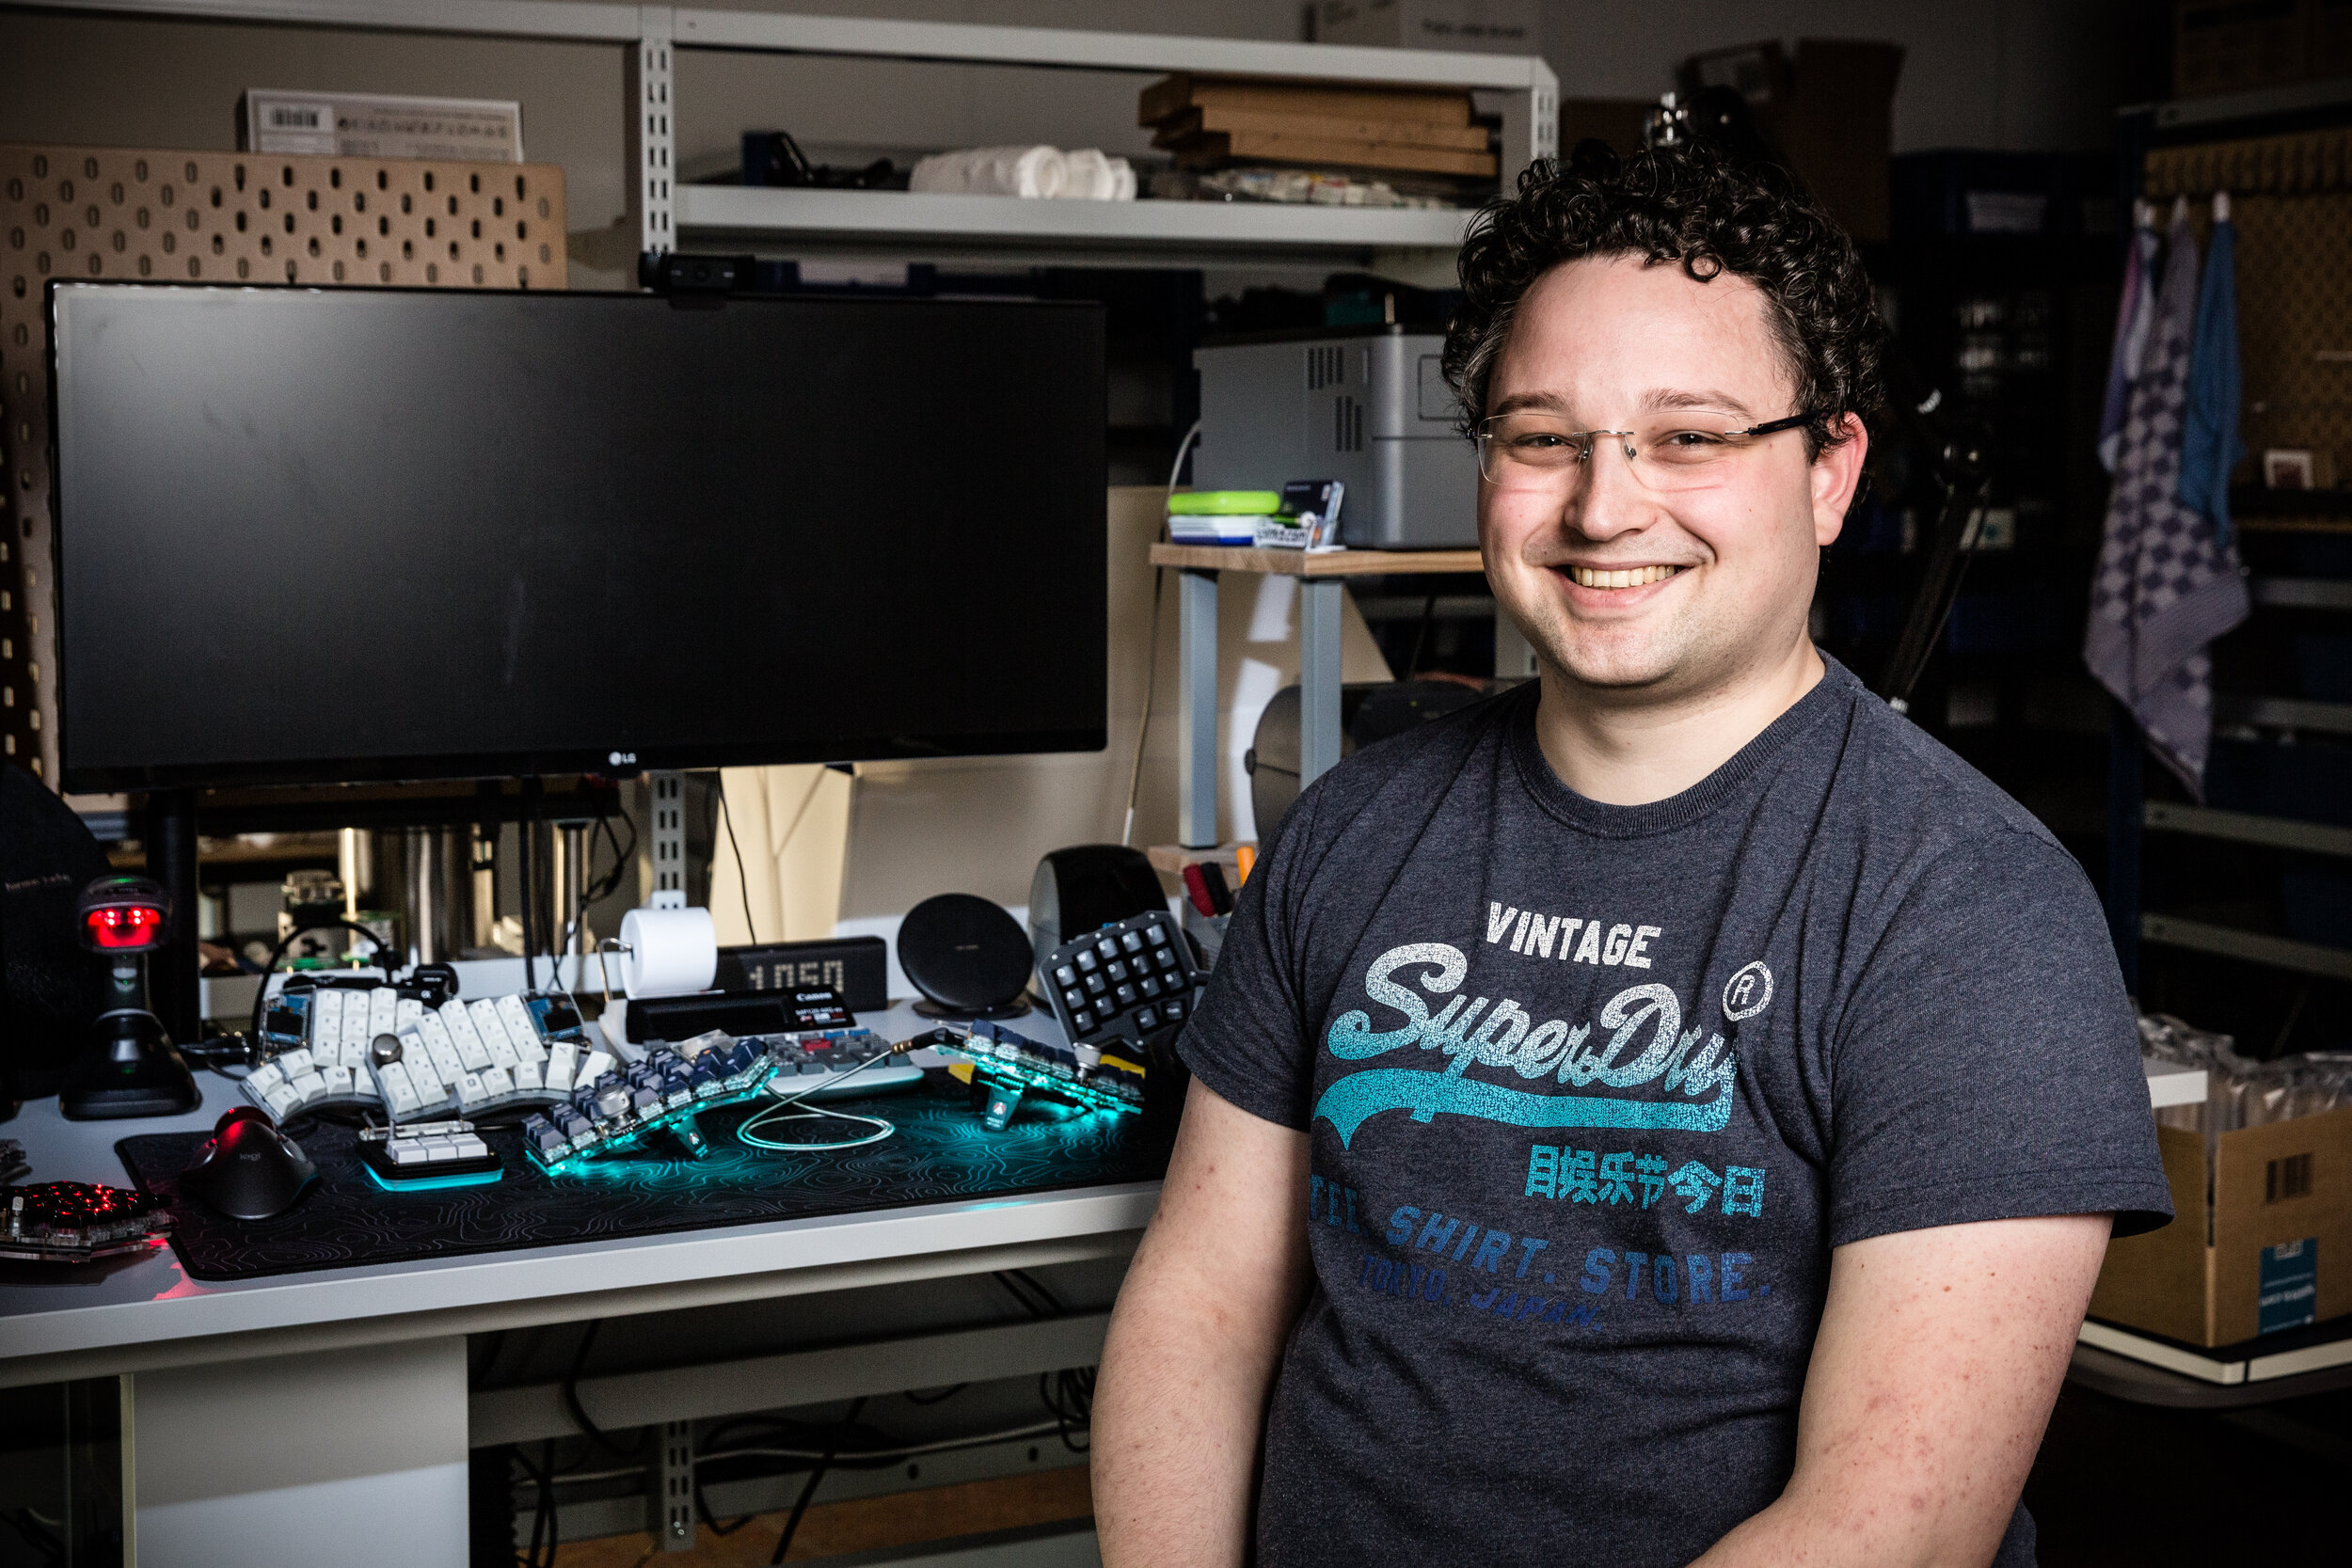 Thomas at his desk, where he displays several of the keyboards he has made. The keyboard with the glow is his daily driver: the Kyria, with a prototype of the tenting puck which allows him to position his keyboard halves at the angle he wants.